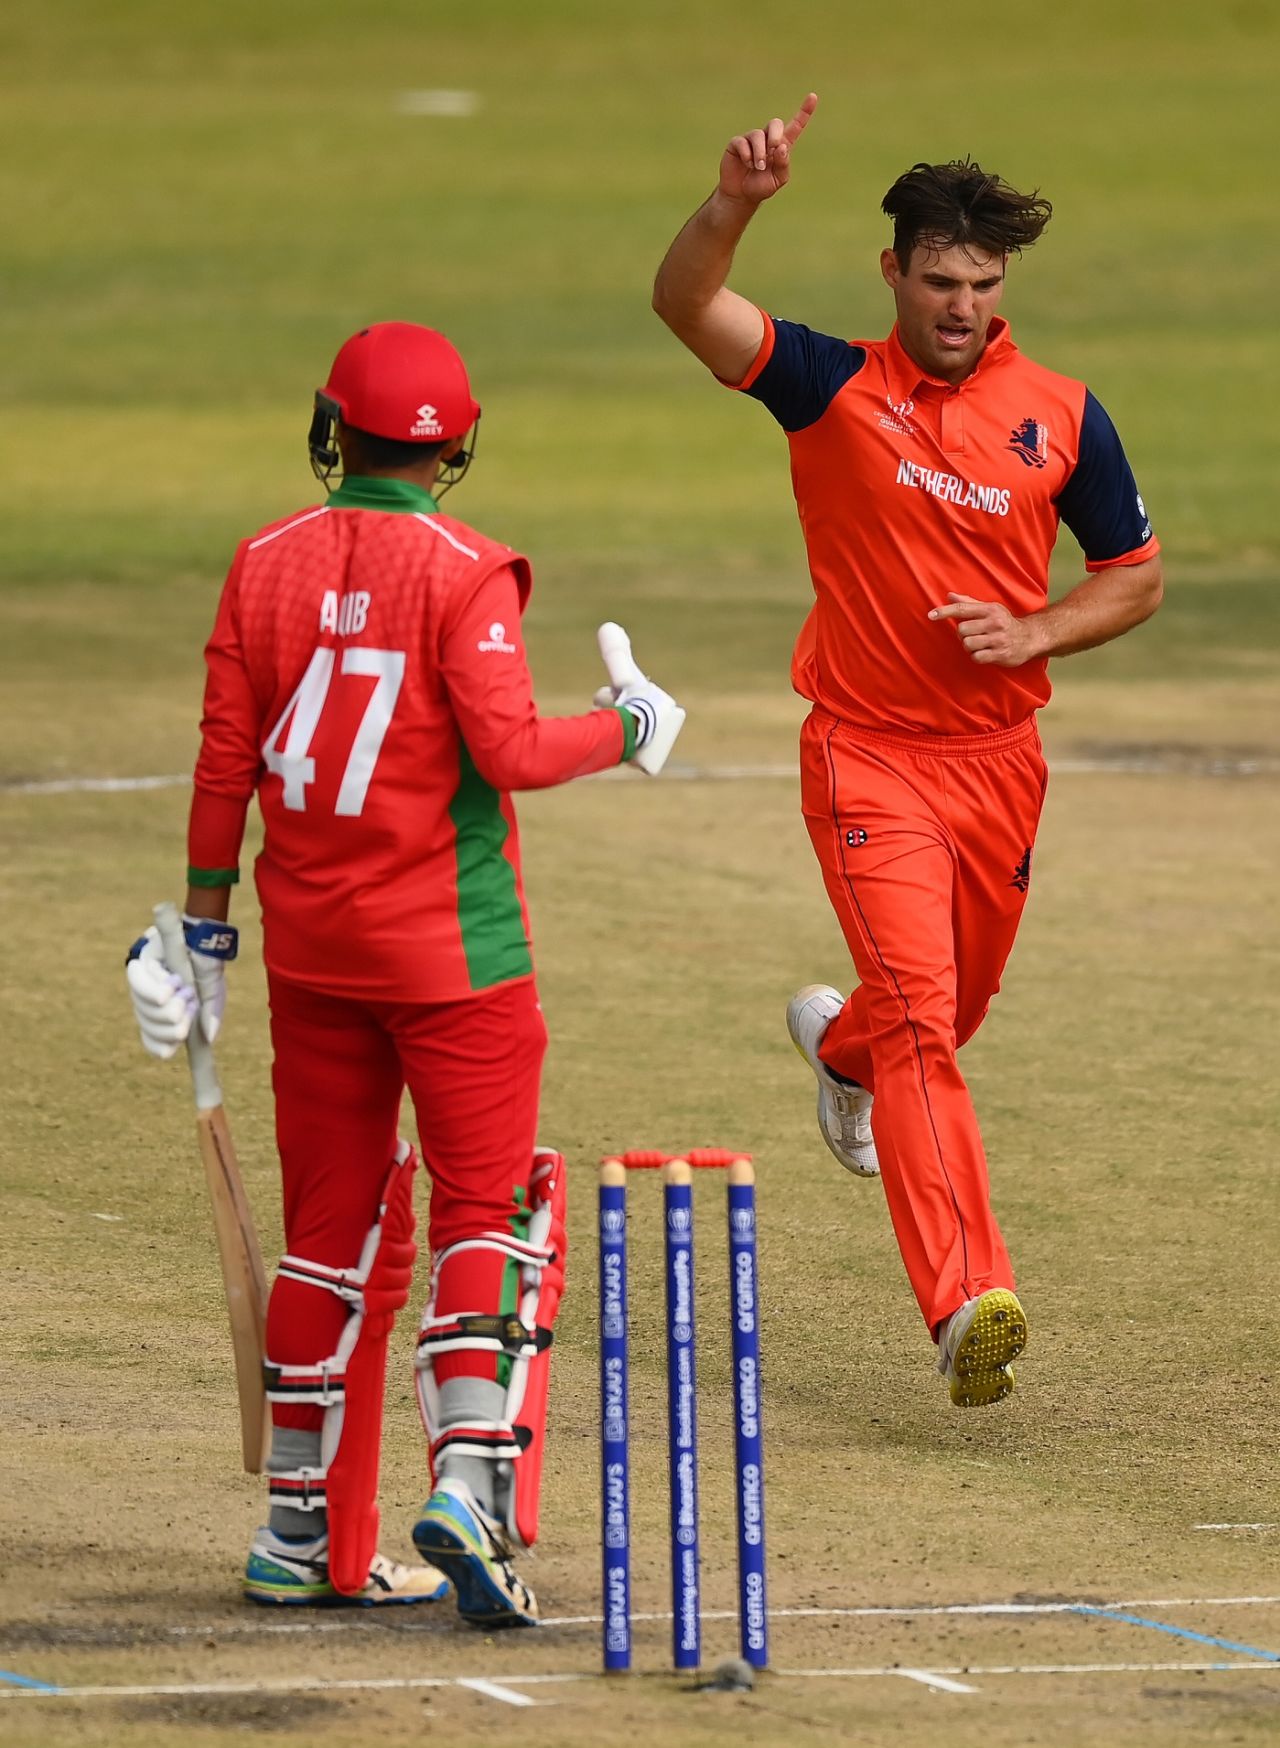 Ryan Klein celebrates another Oman wicket, Netherlands vs Oman, Match 25, Harare, July 03 2023